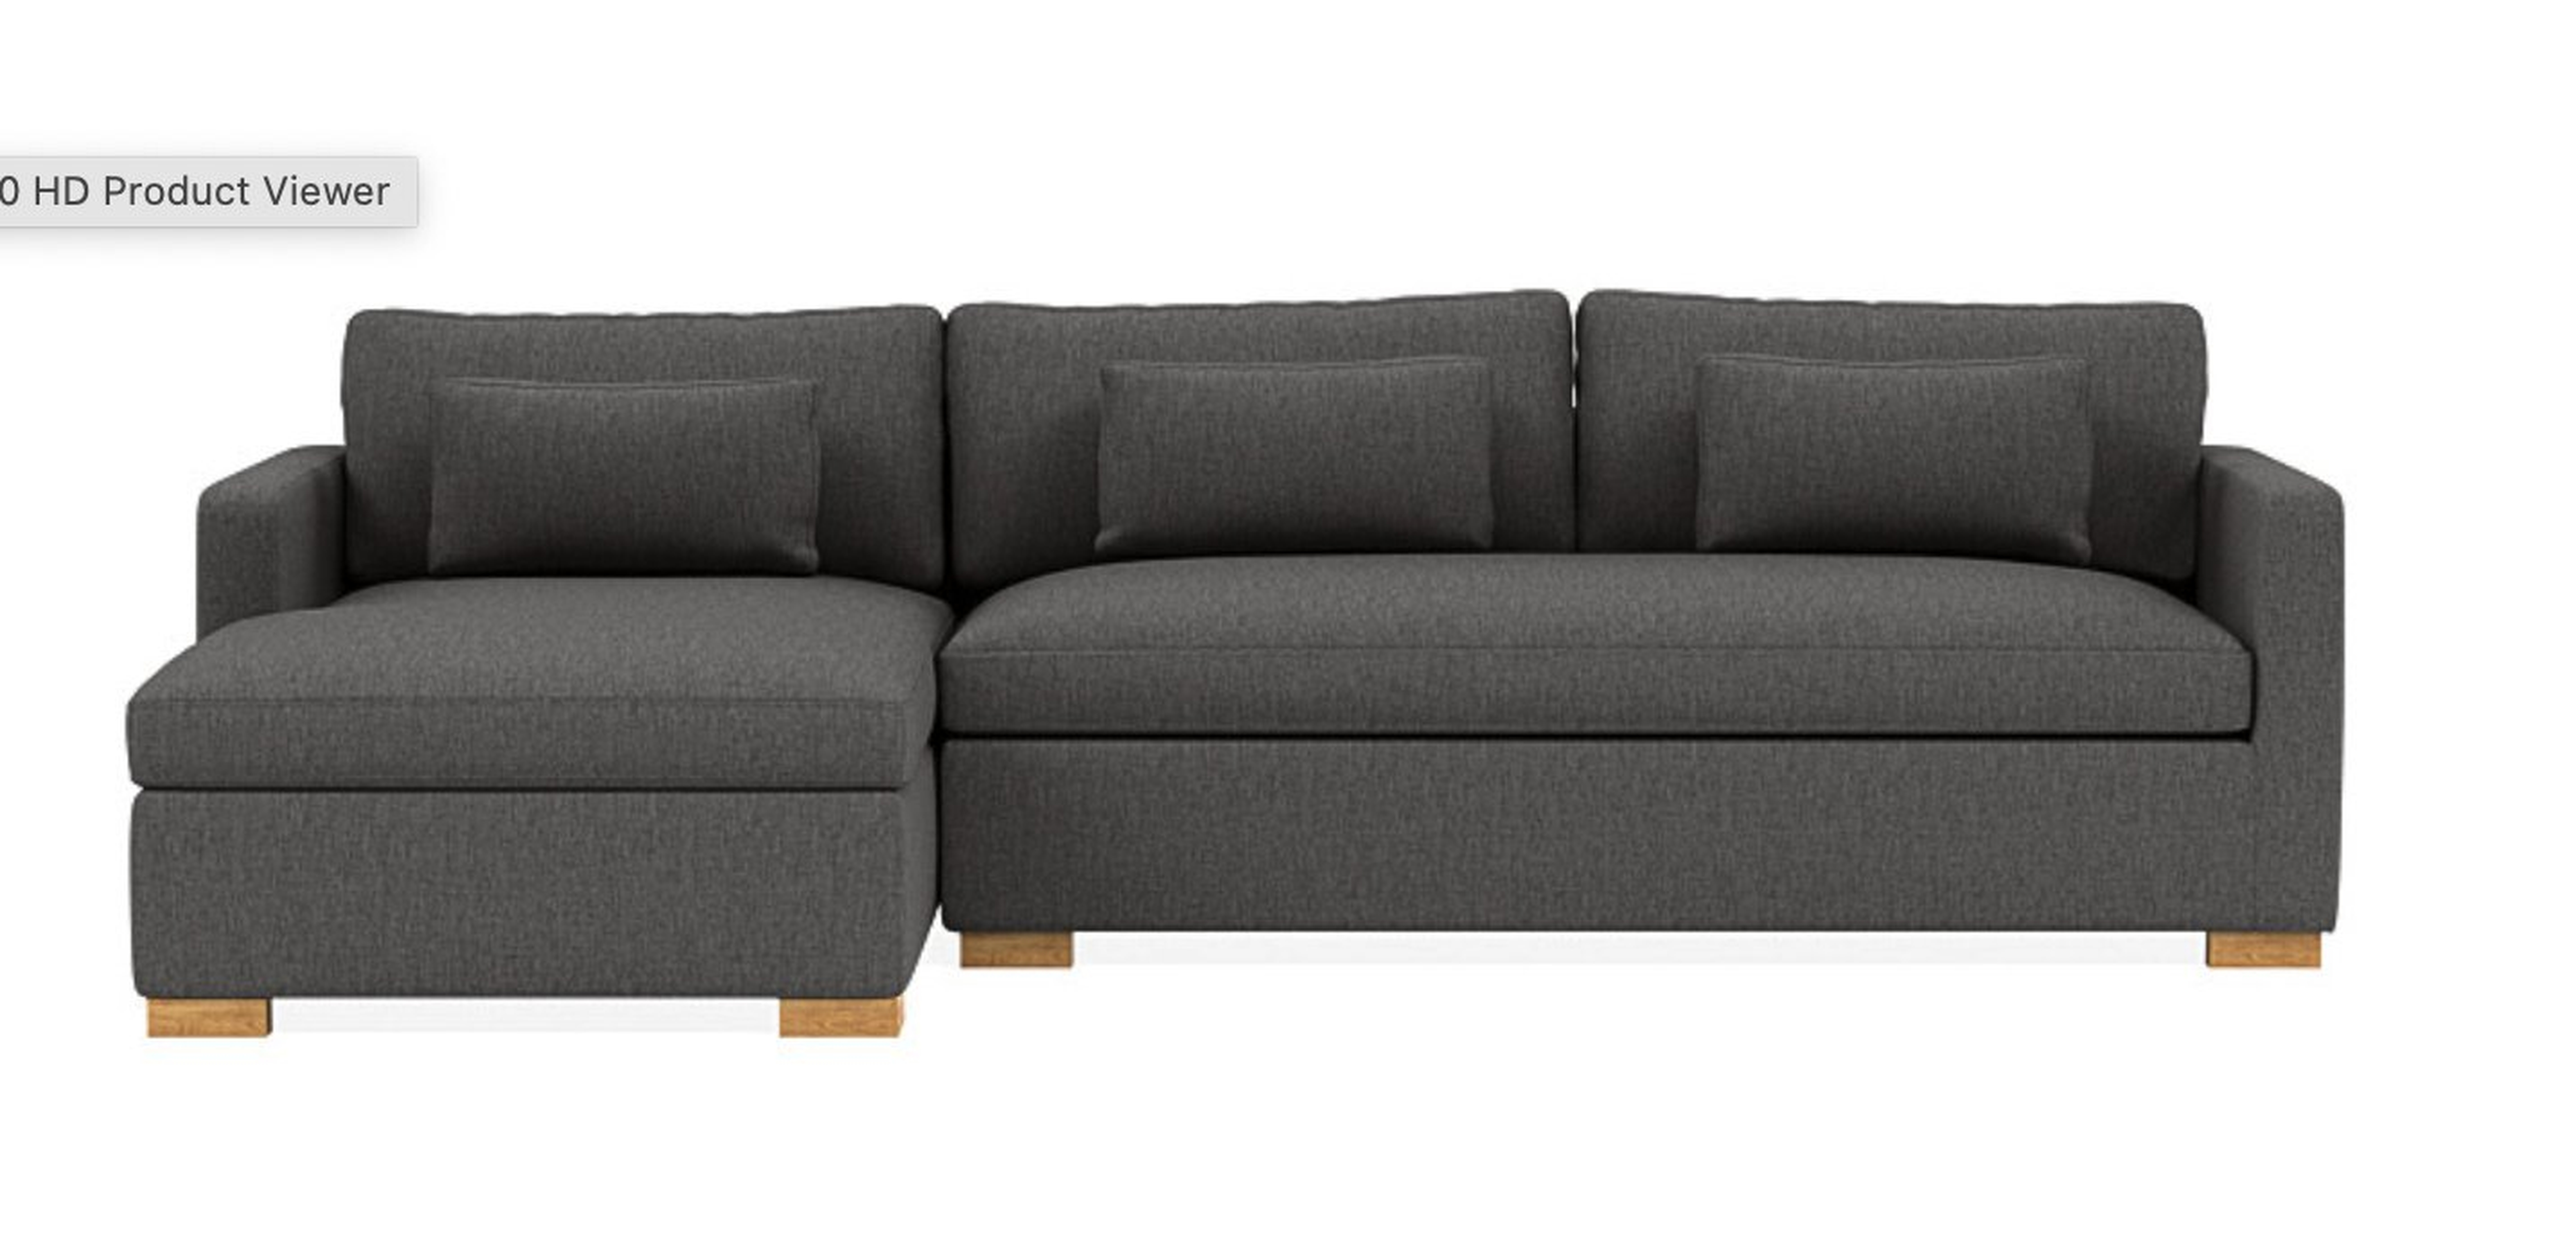 Charly Sectional with Grey Mushroom Fabric, down alternative cushions, extended right chaise, extended left chaise, and Natural Oak legs - Interior Define